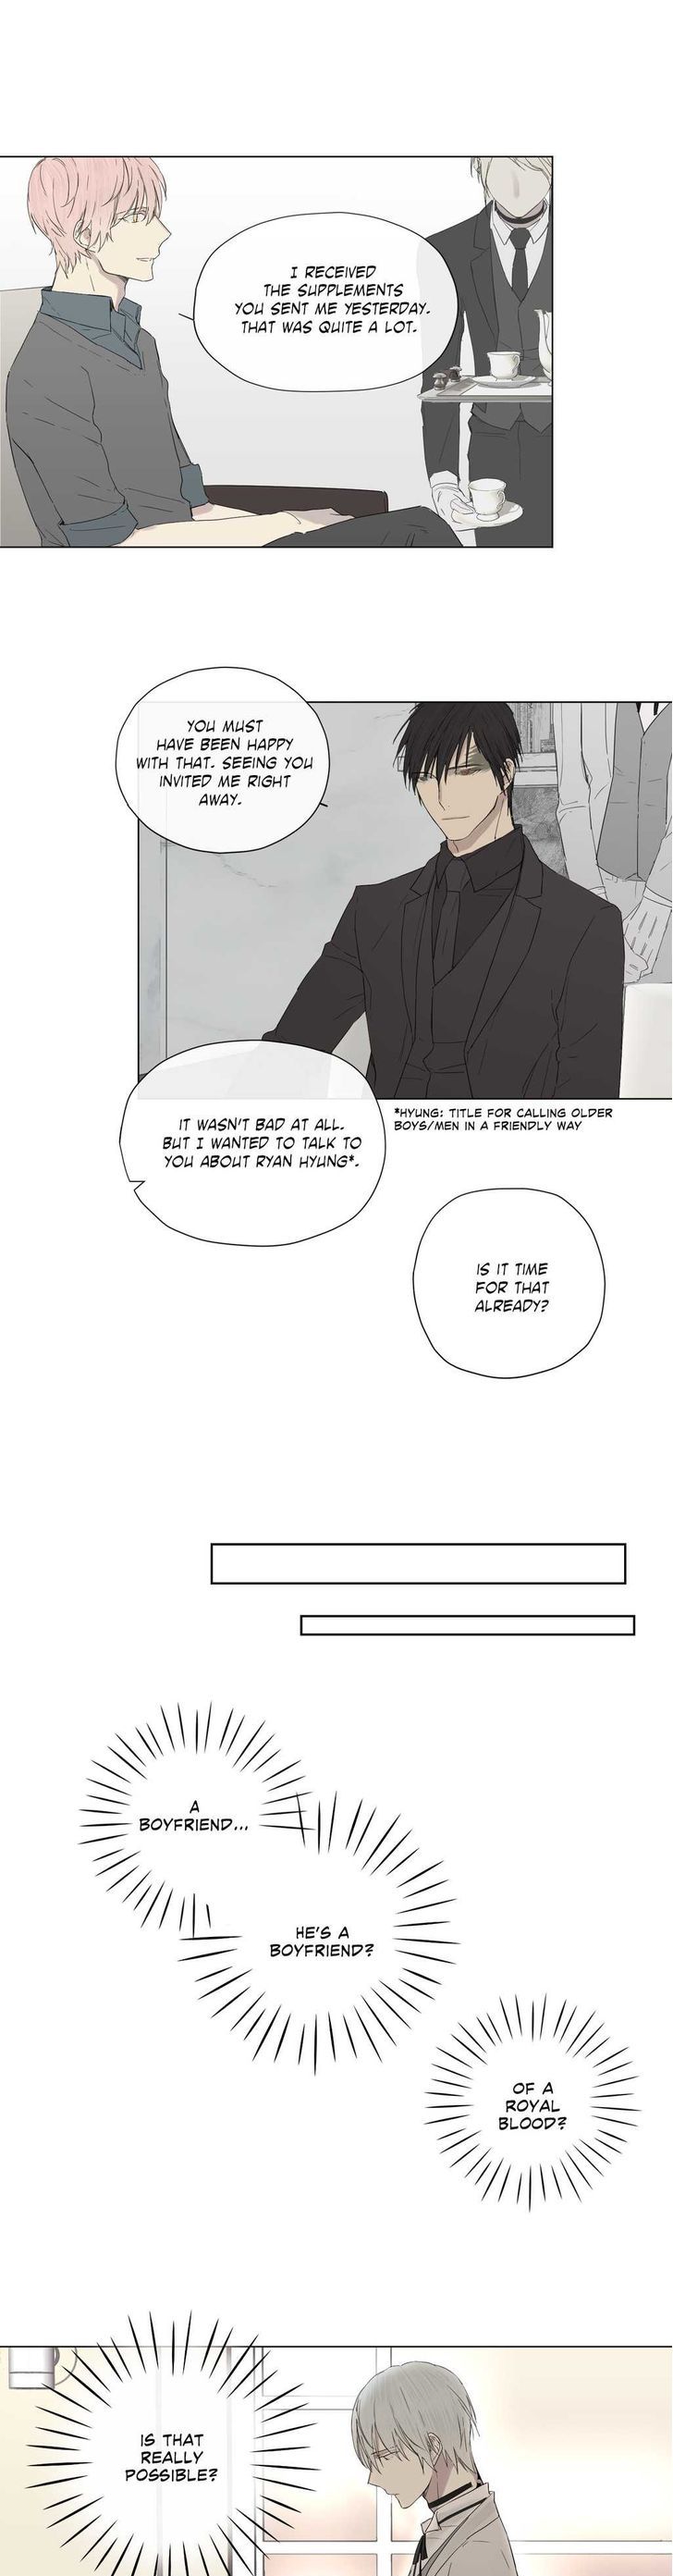 Royal Servant - Chapter 9 Page 19